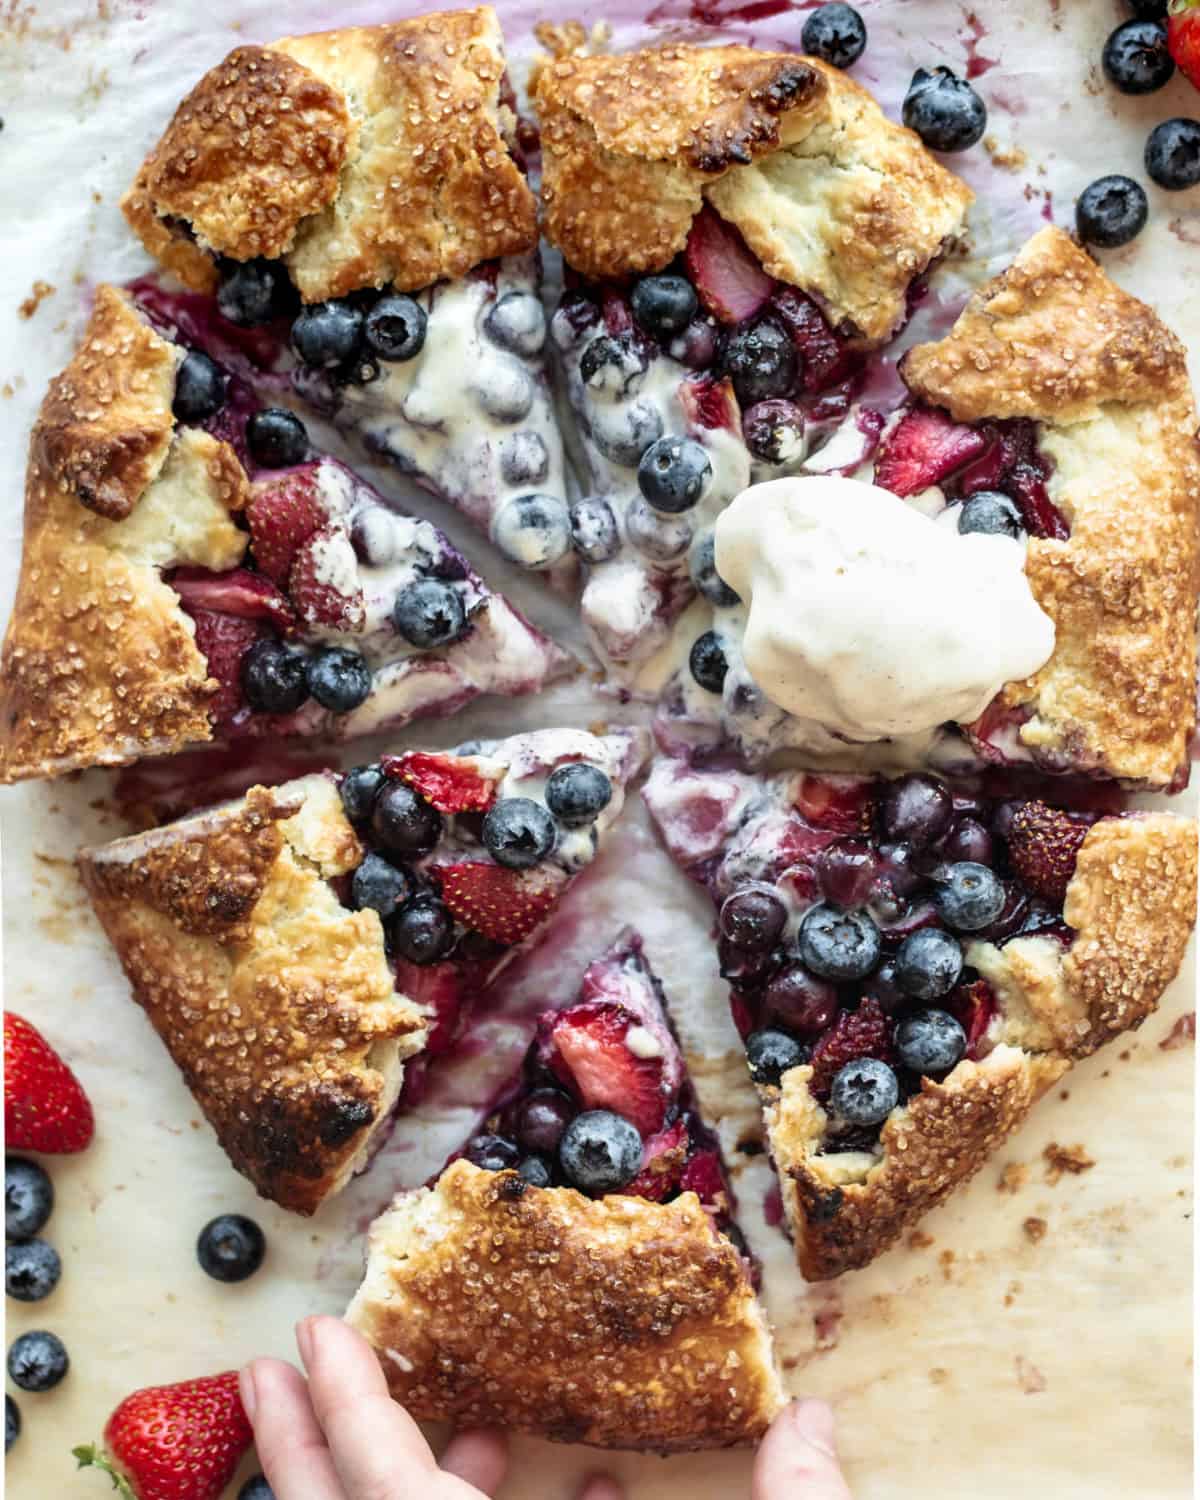 Blueberry and strawberry pie on a table.